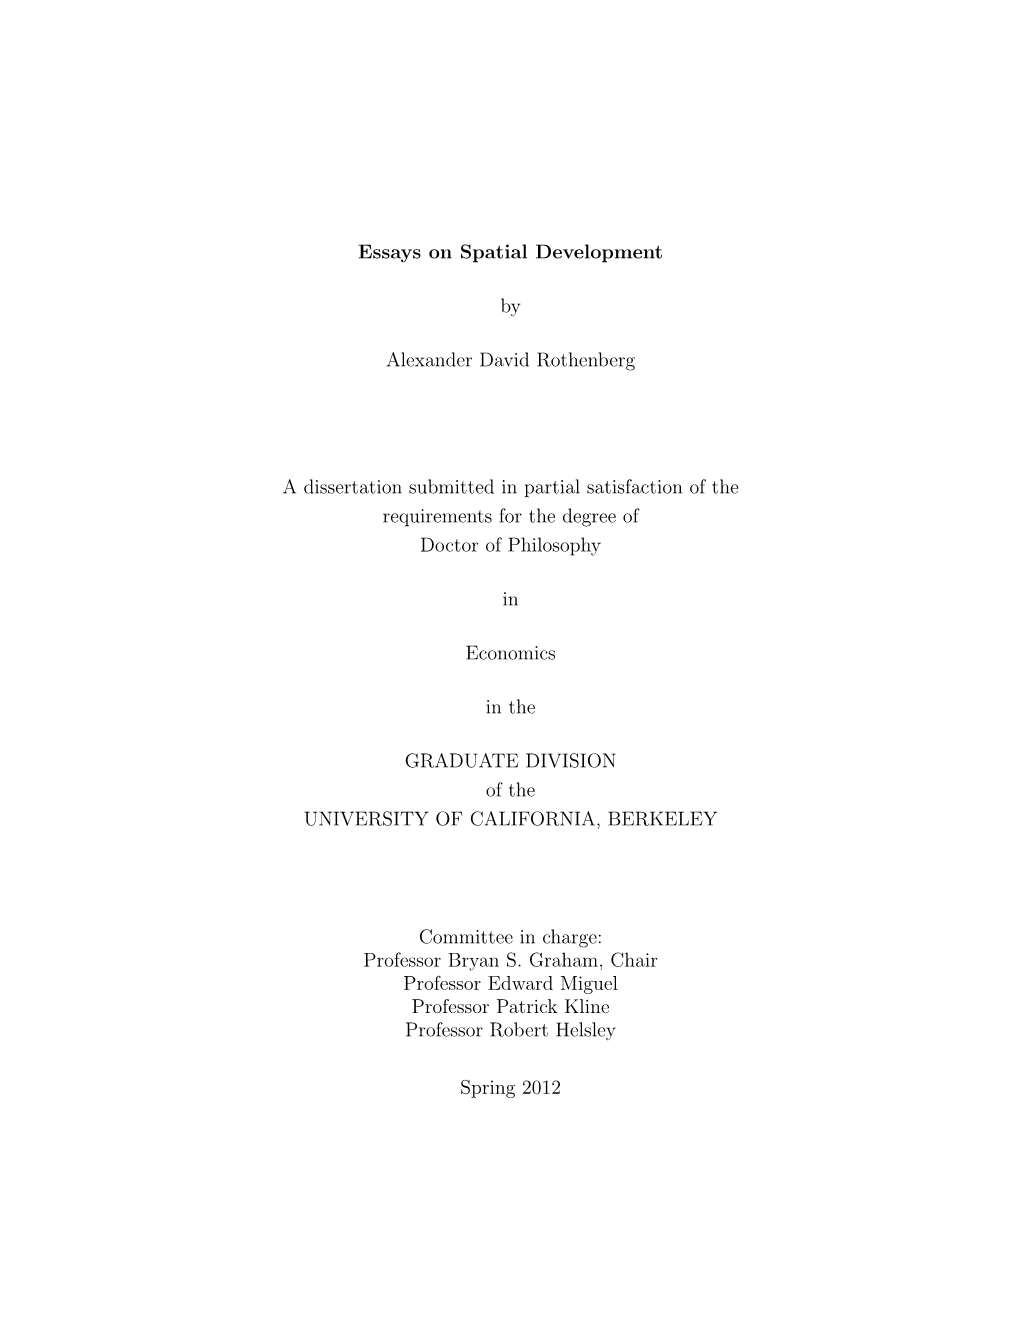 Essays on Spatial Development by Alexander David Rothenberg a Dissertation Submitted in Partial Satisfaction of the Requirements